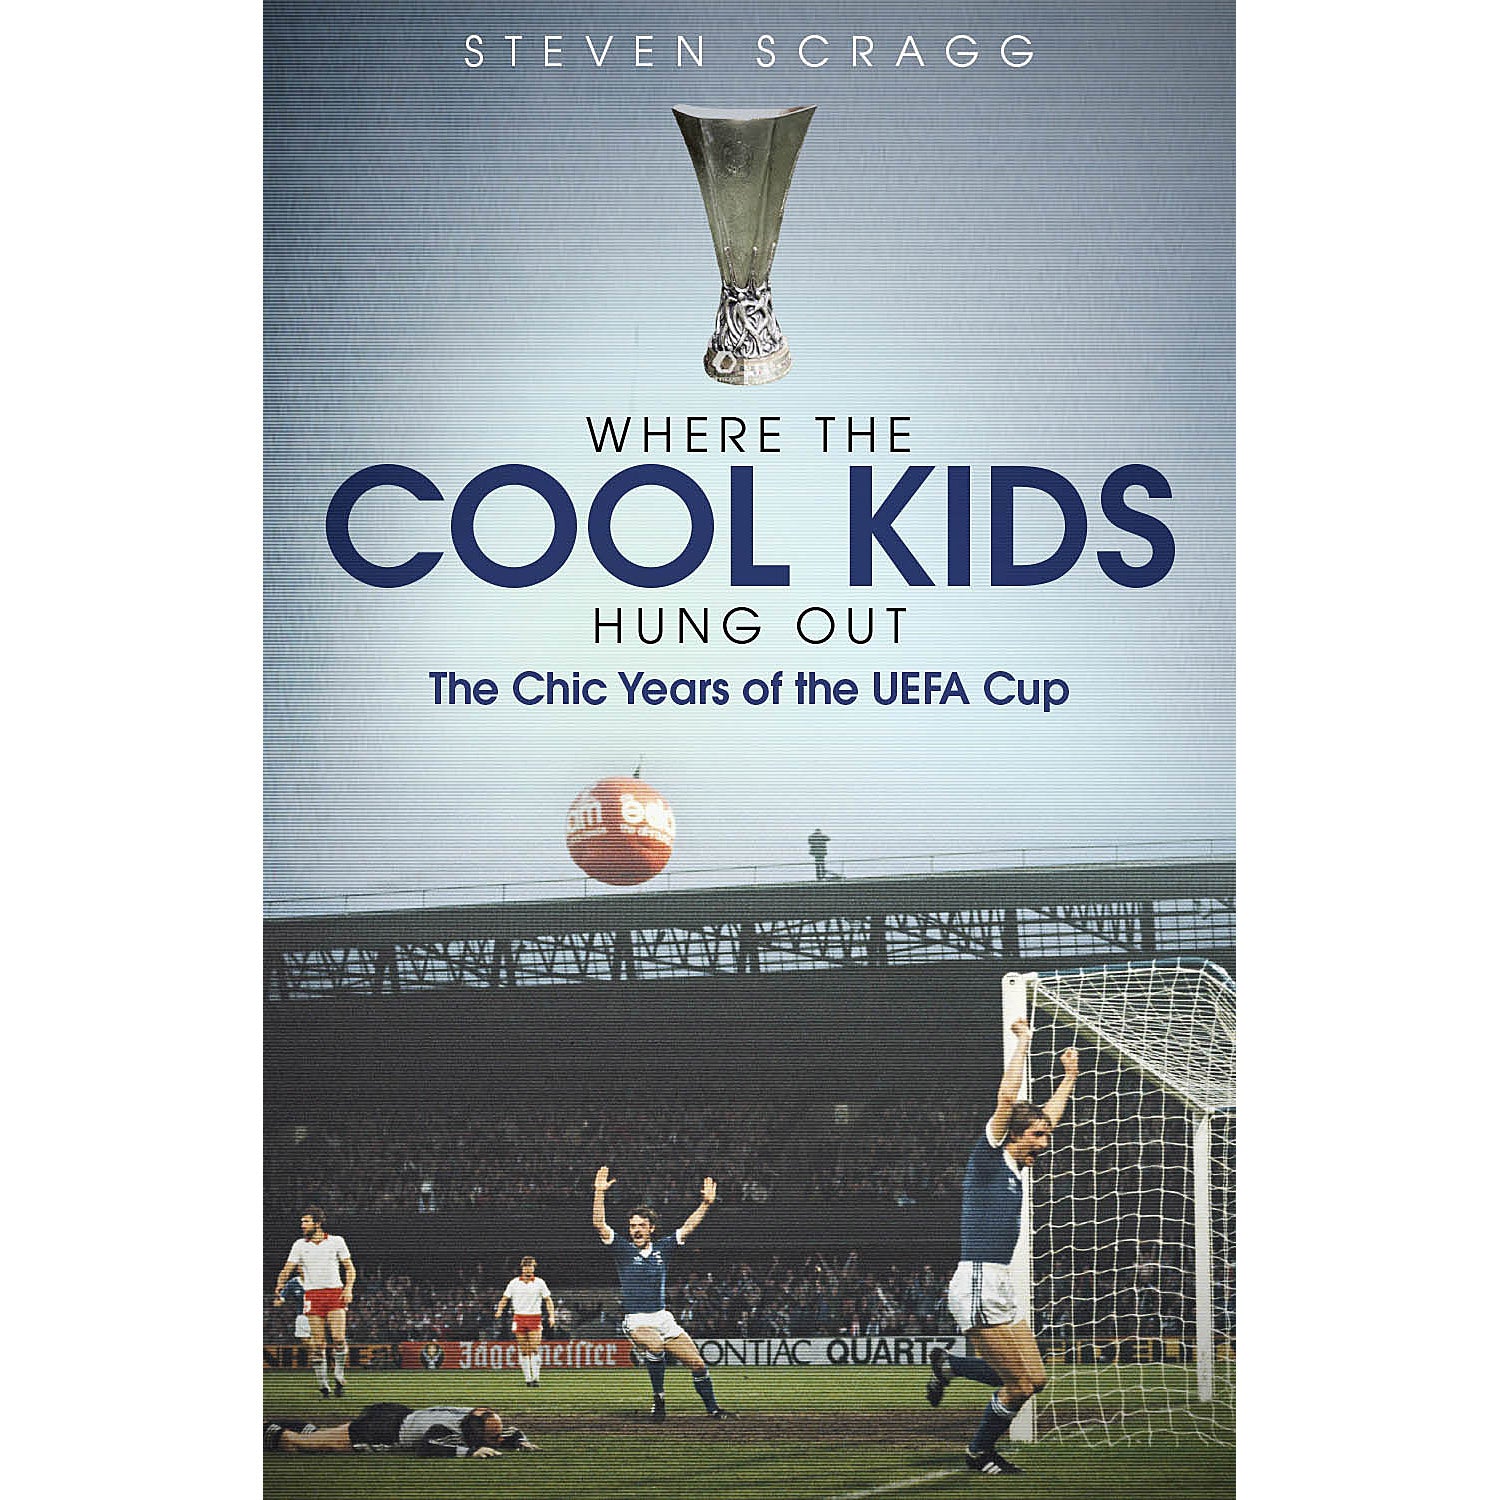 Where the Cool Kids Hung Out – The Chic Years of the UEFA Cup